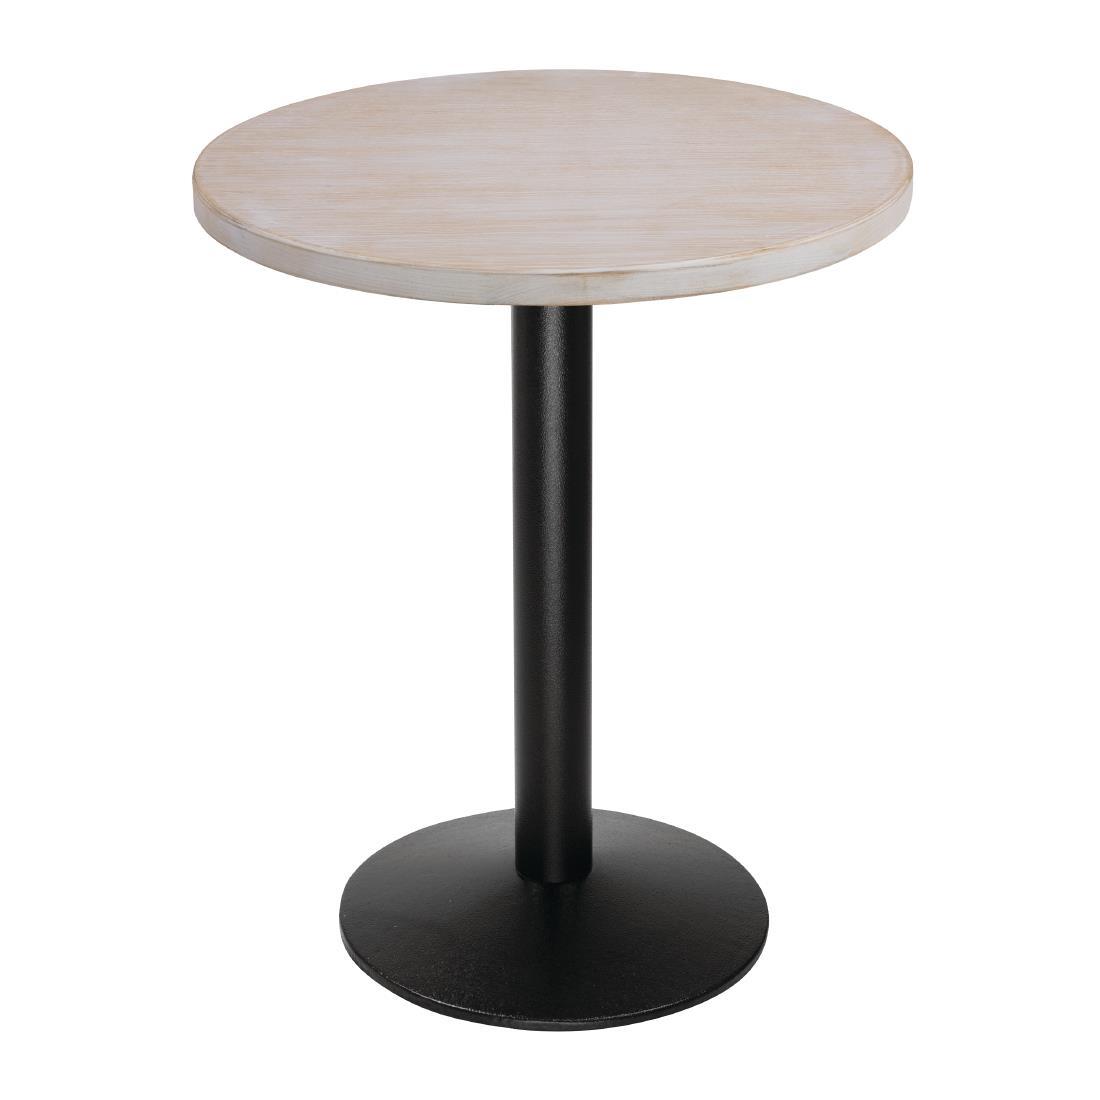 Bolero Pre-drilled Round Table Top Vintage White 600mm - DY729  - 5